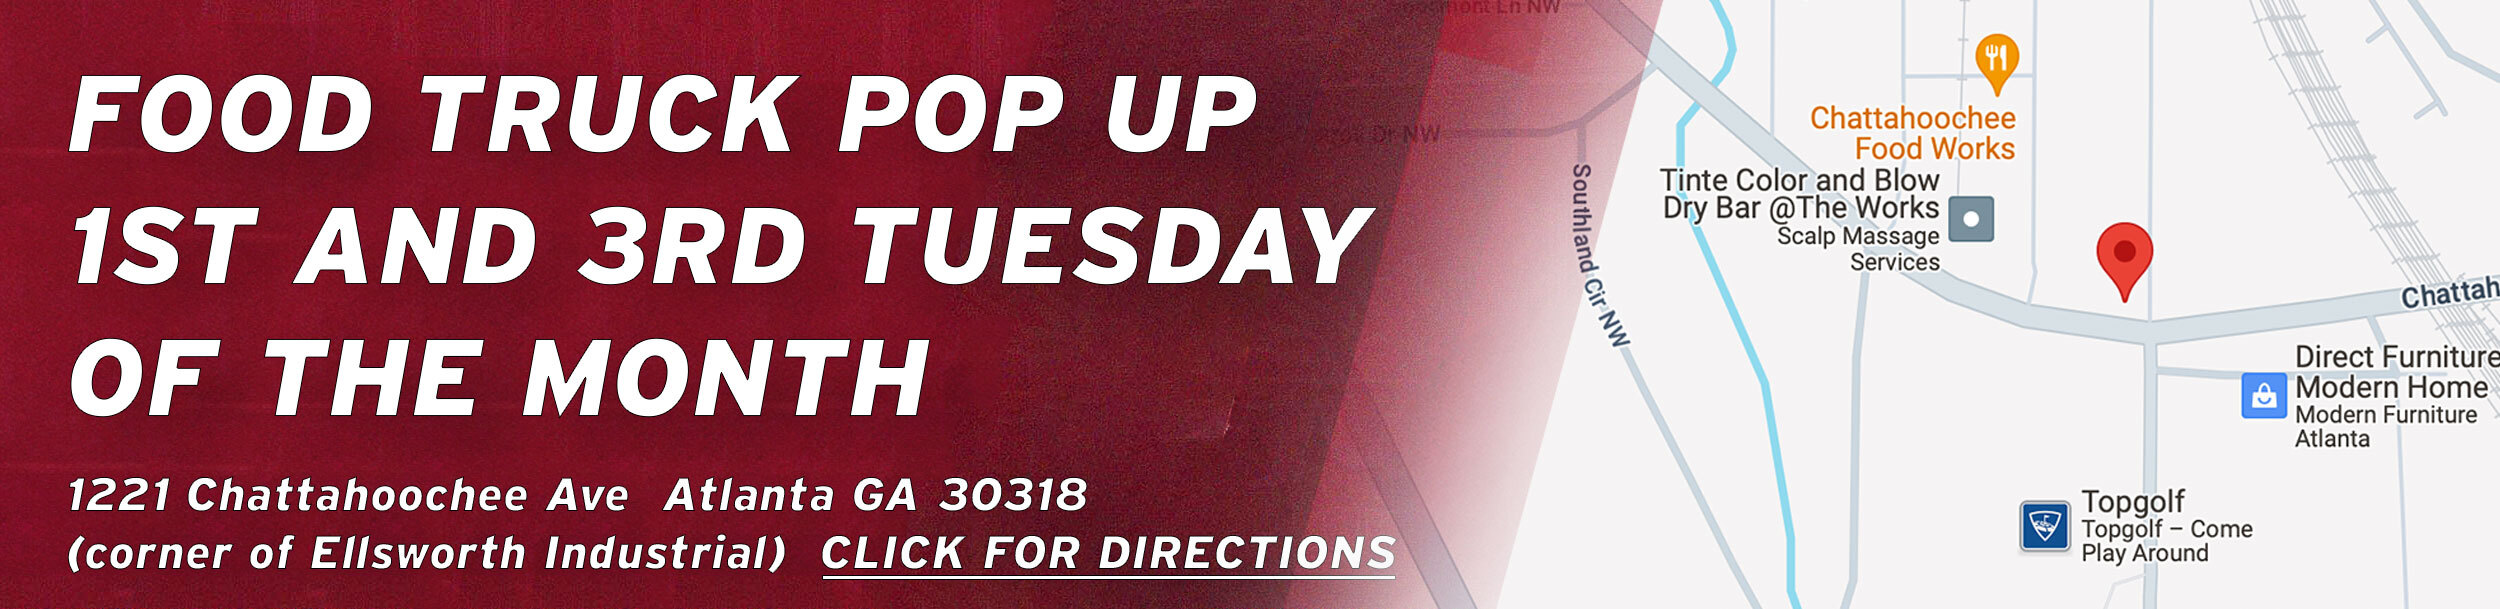 Food Truck Pop Up 1st and 3rd Tuesday of the Month - Click for directions